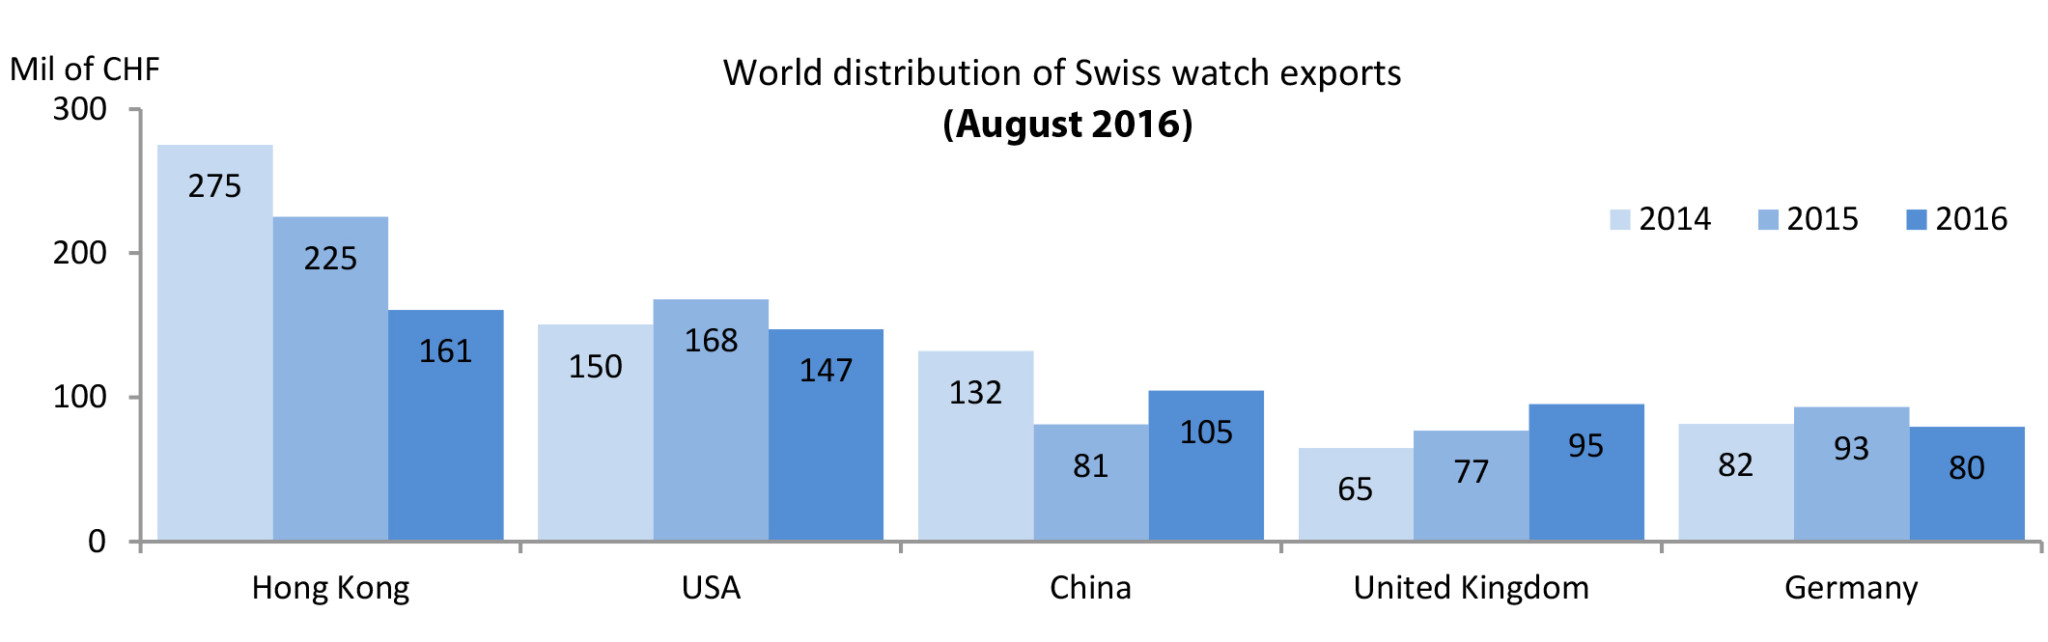 World distribution of swiss watch exports (aug 2016)